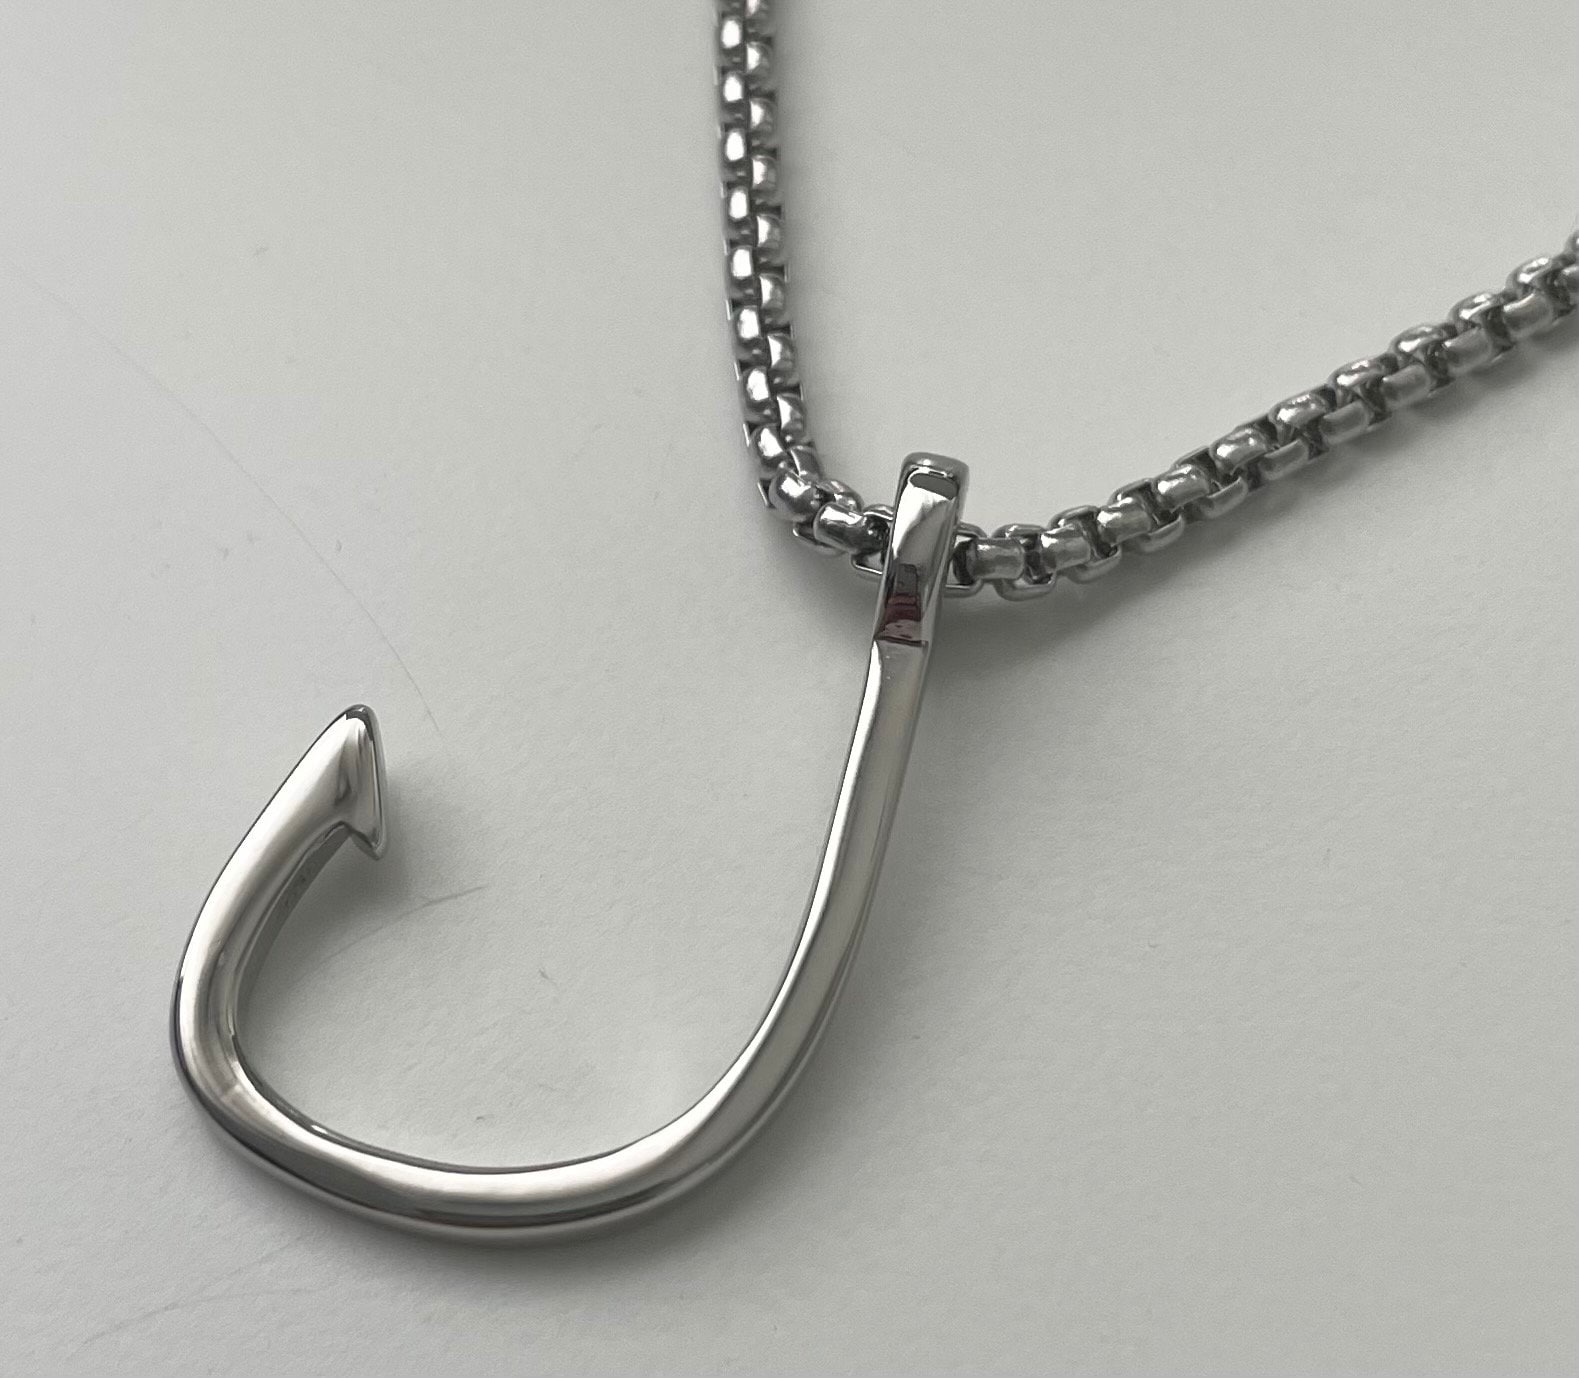 Fish Hook. Gift for Him. Fishing Hook Necklace. Fisherman Gifts. Beautiful  Men's Pendant for Outdoor Enthusiasts, Boating Life Style 